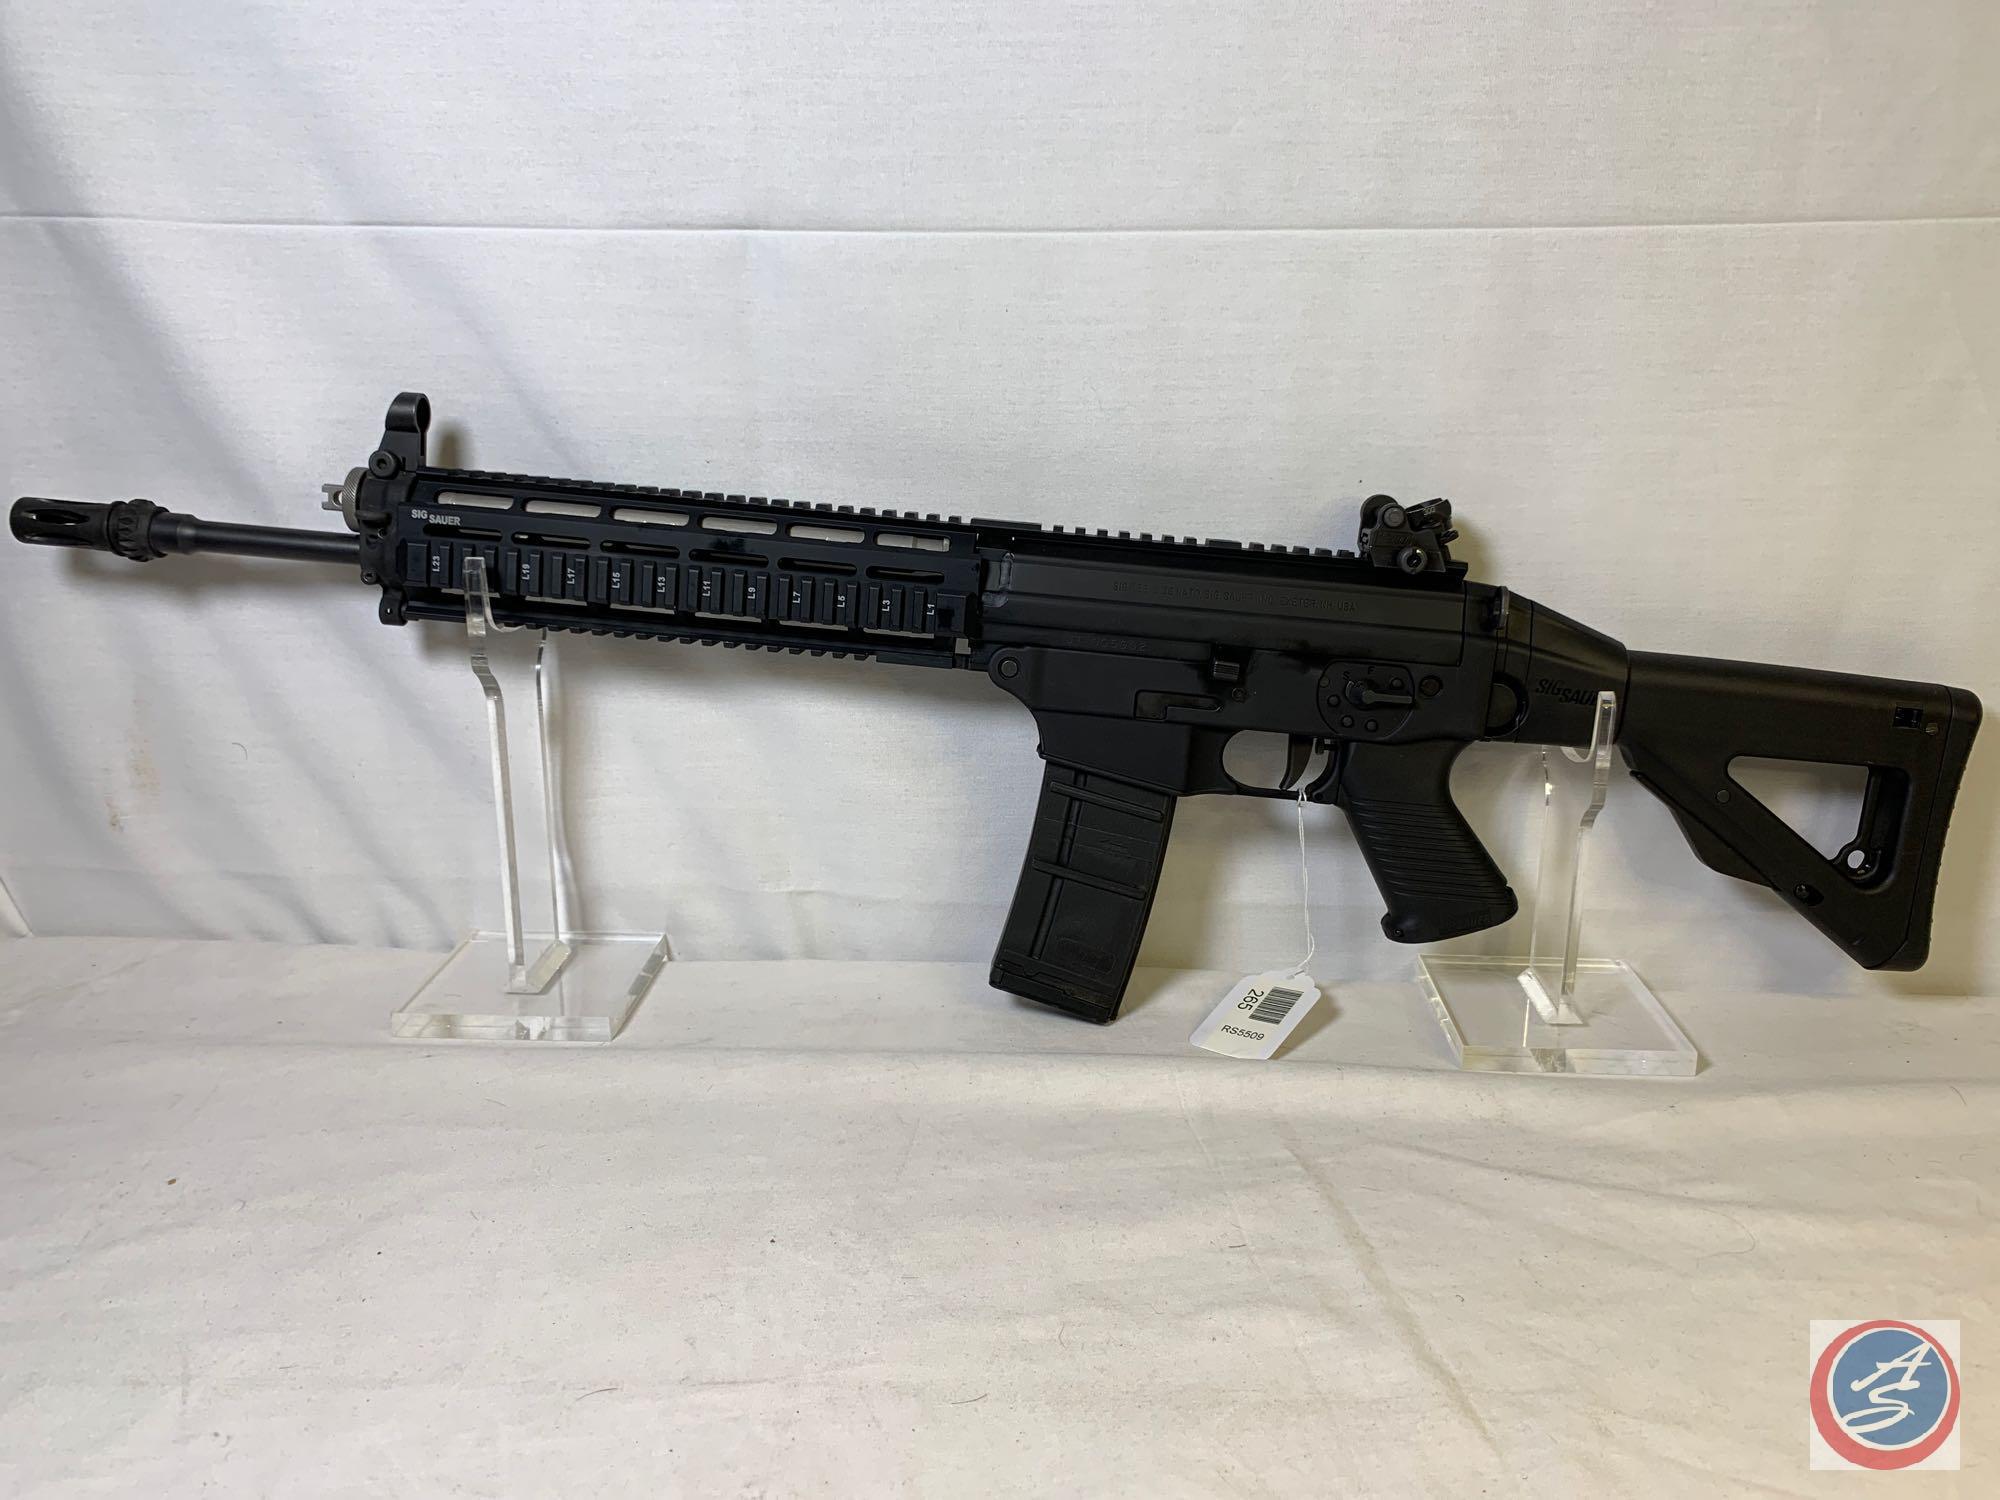 Sig Sauer model Sig556 556 Rifle Semi Auto Rifle with folding stock factory rotary diopter sight, 2